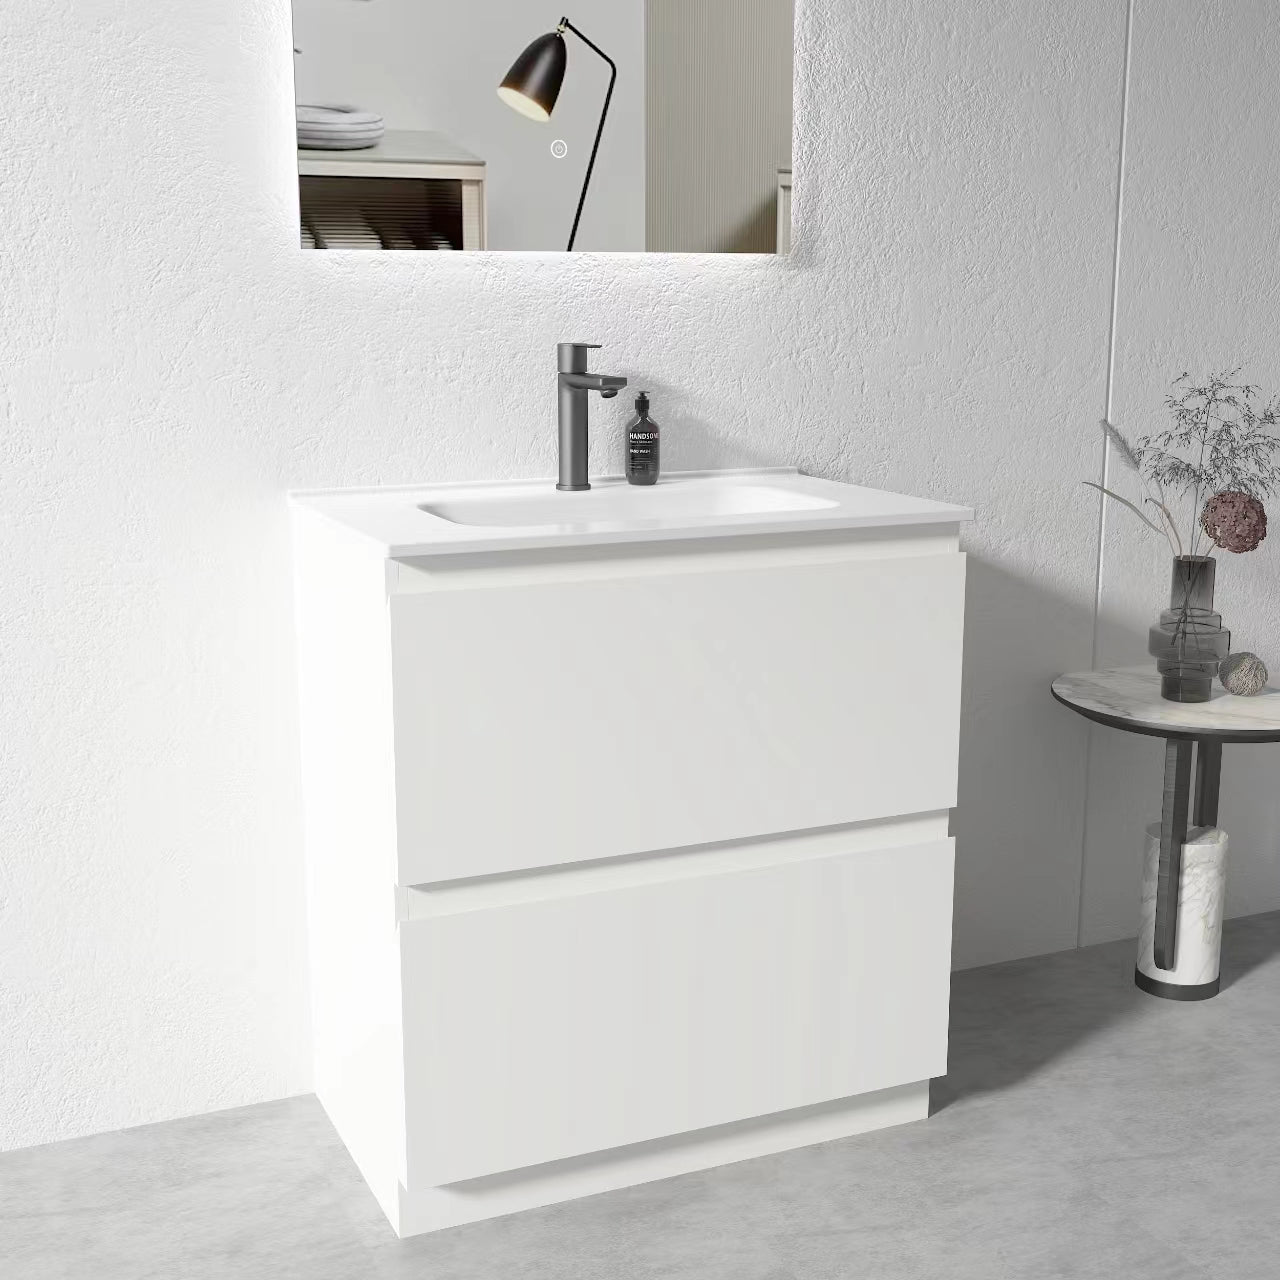 750mm Plywood Gloss White Floor Standing Vanity Unit With Ceramic Basin